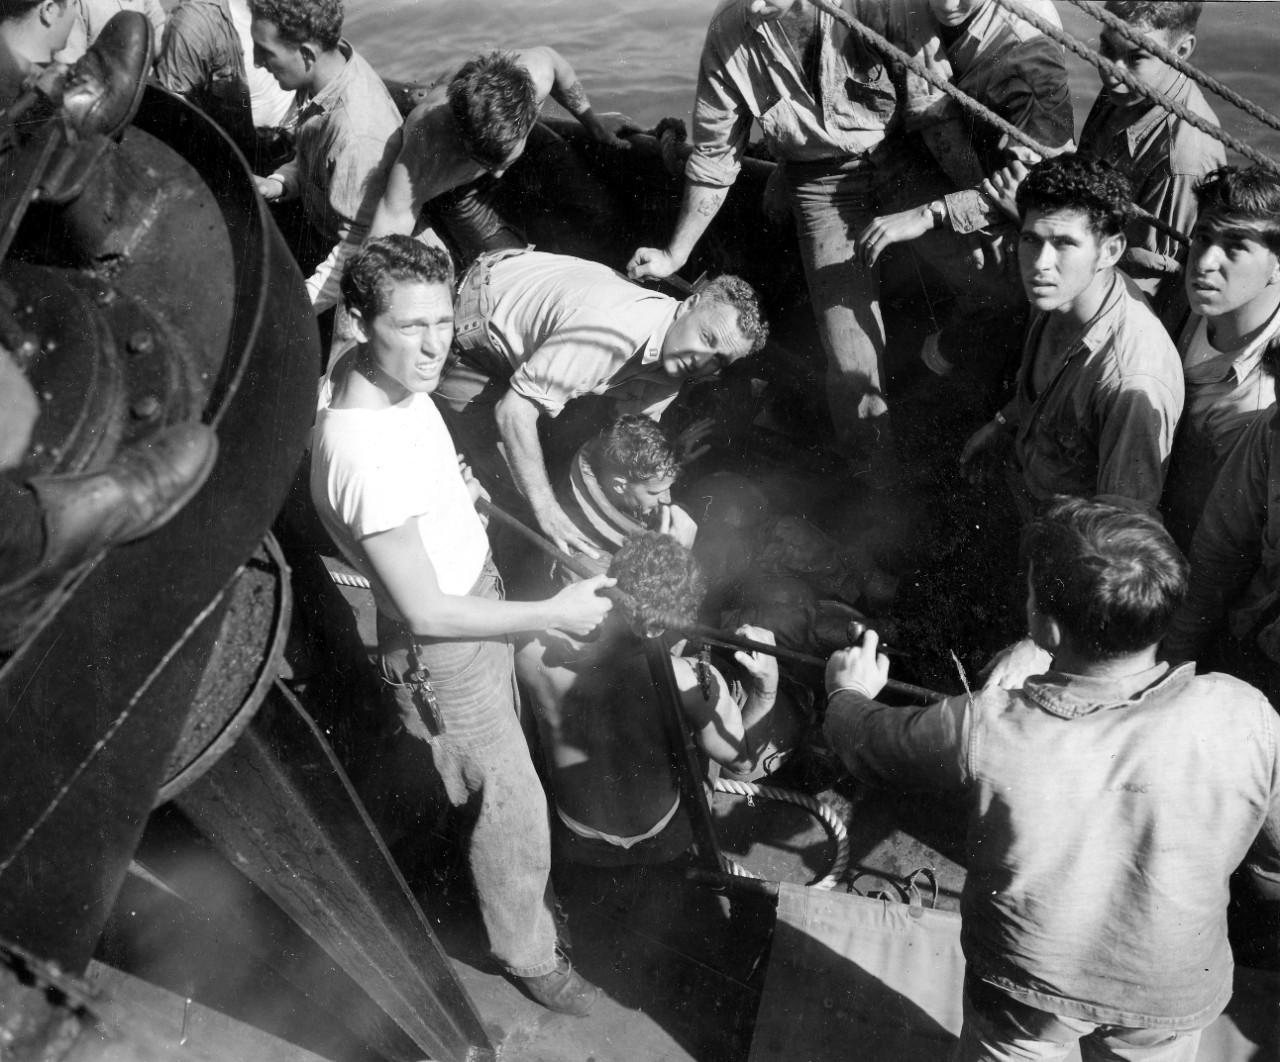 Lt. Robert S. Hurlbut, MC-V(G), USNR, Halligan’s medical officer, provides first aid for a pilot –evidence suggests perhaps Lt.(j.g.) Currier -- who has been rescued after a water landing (note aviator’s blown-up life vest collar). Hurlbut -- bor...